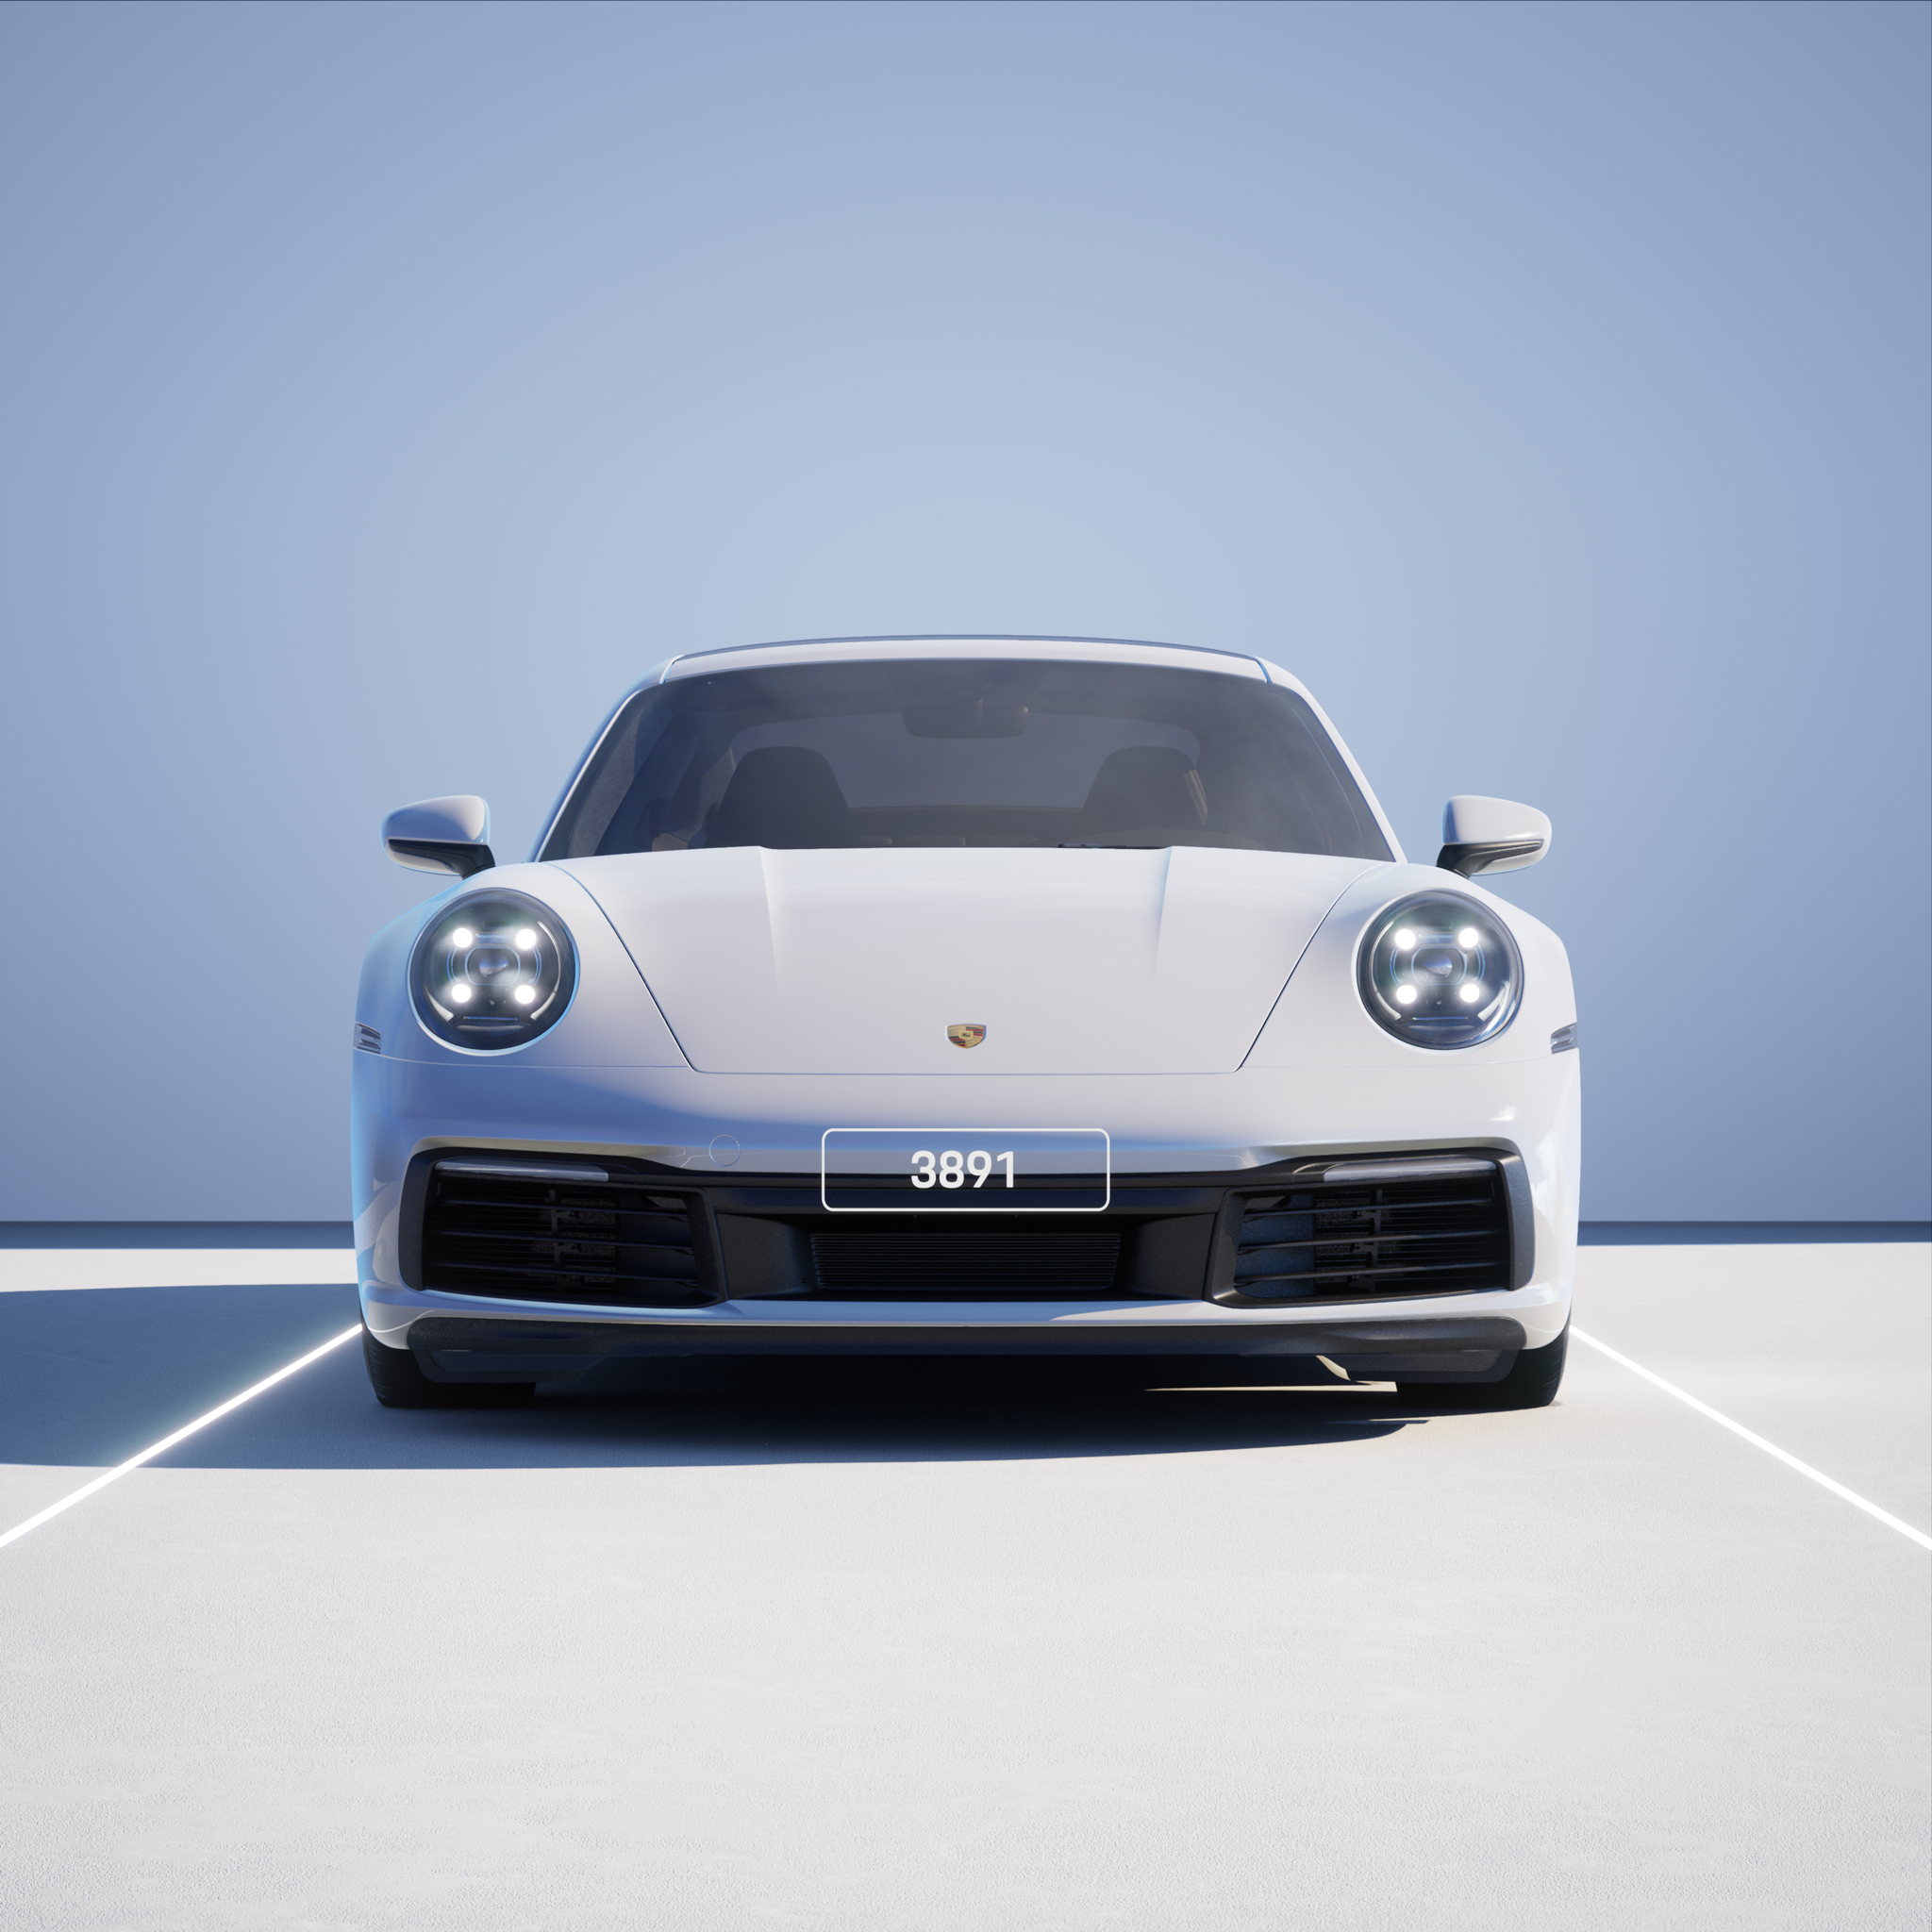 The PORSCHΞ 911 3891 image in phase